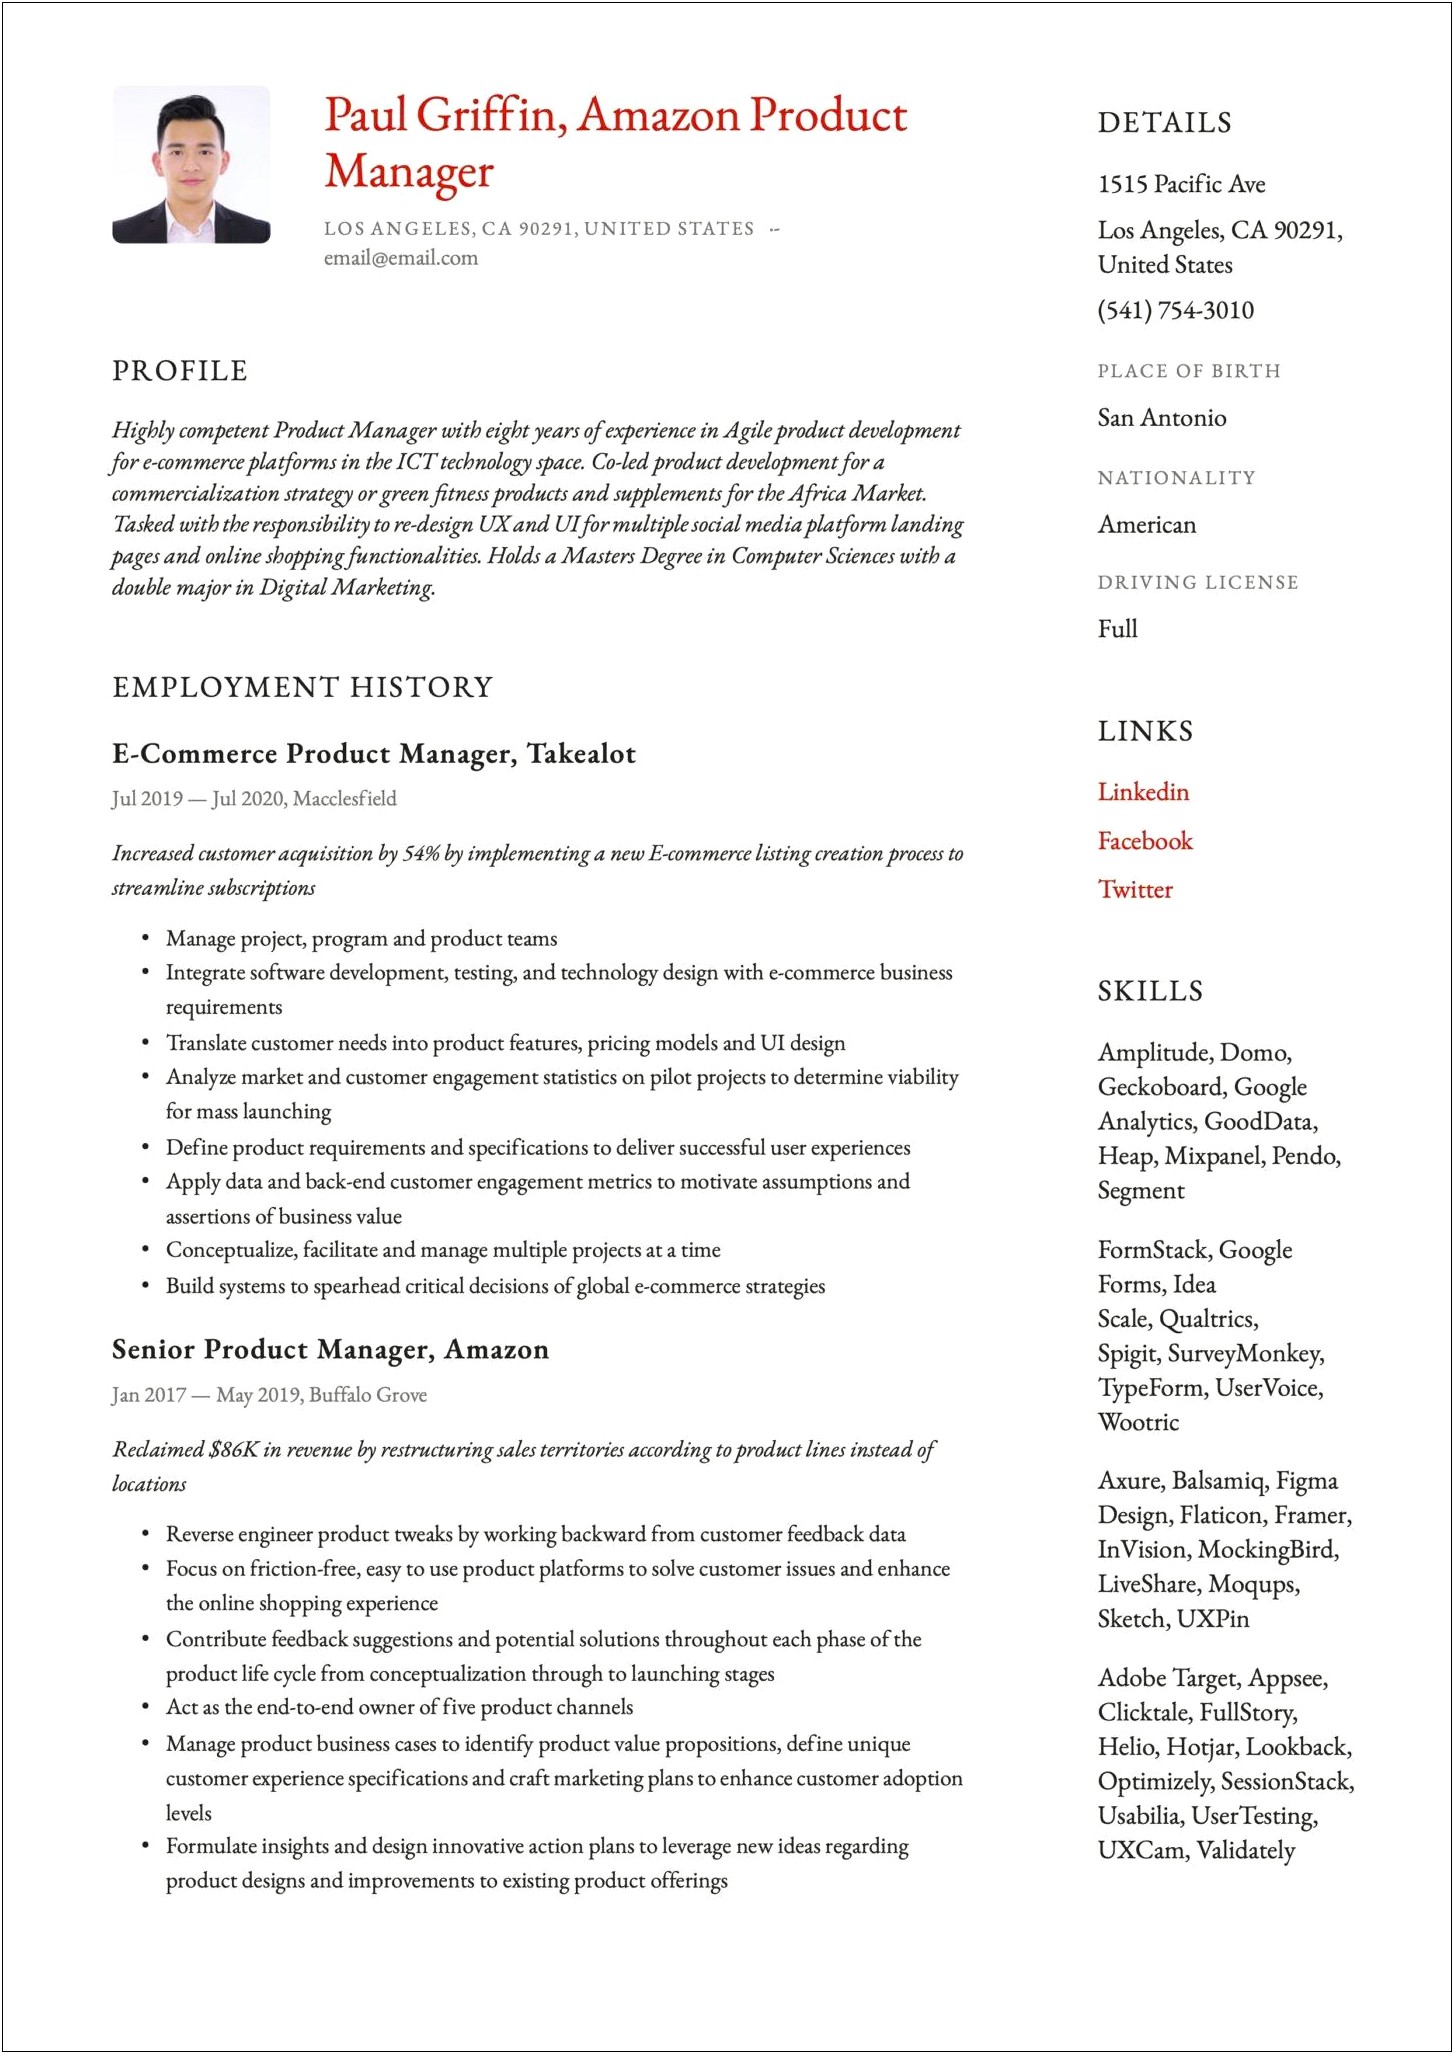 Resume To Amazon Job Operations Manager